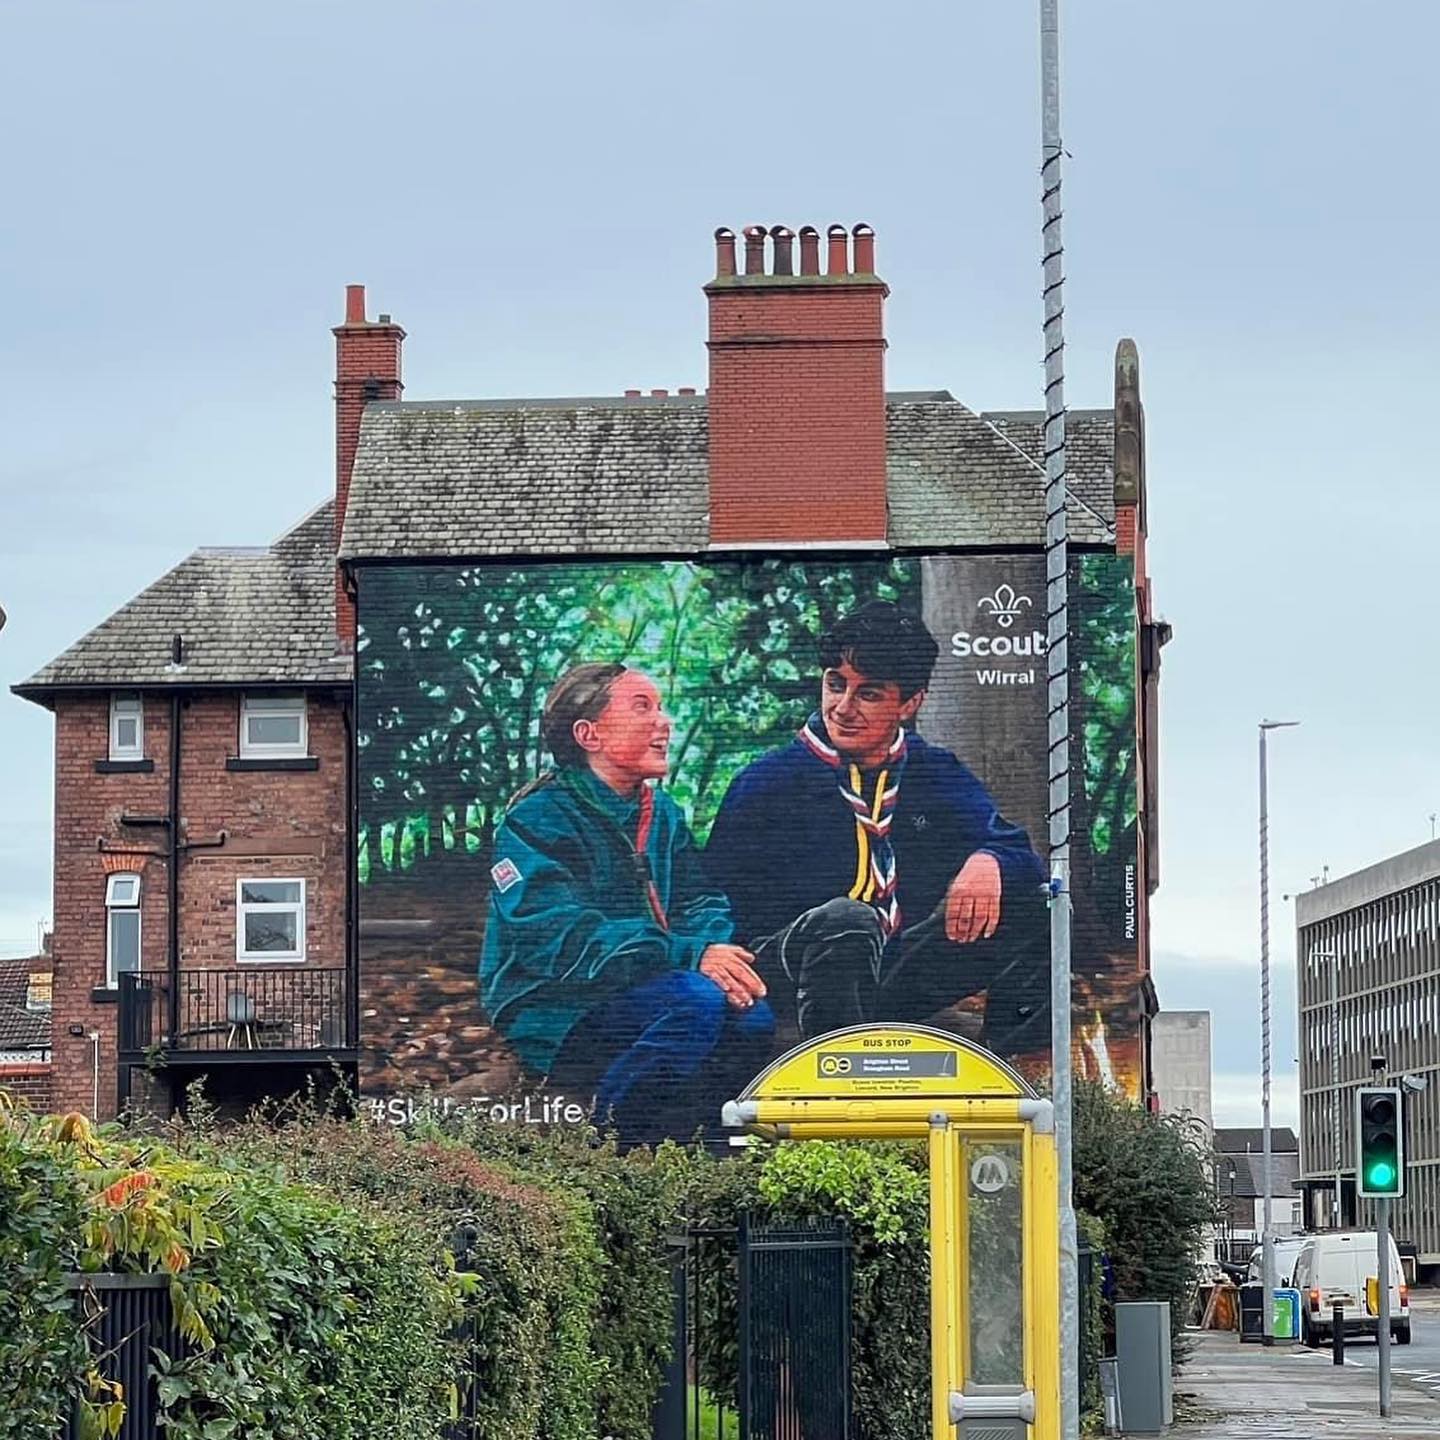 The image shows the Wirral Scouts mural, painted on the side of a brick building. The photo has been taken from the street, and there is a yellow bus stop and lamp post next to a hedge in front of the mural. The photo aims to show the size of the mural to someone walking down the street.